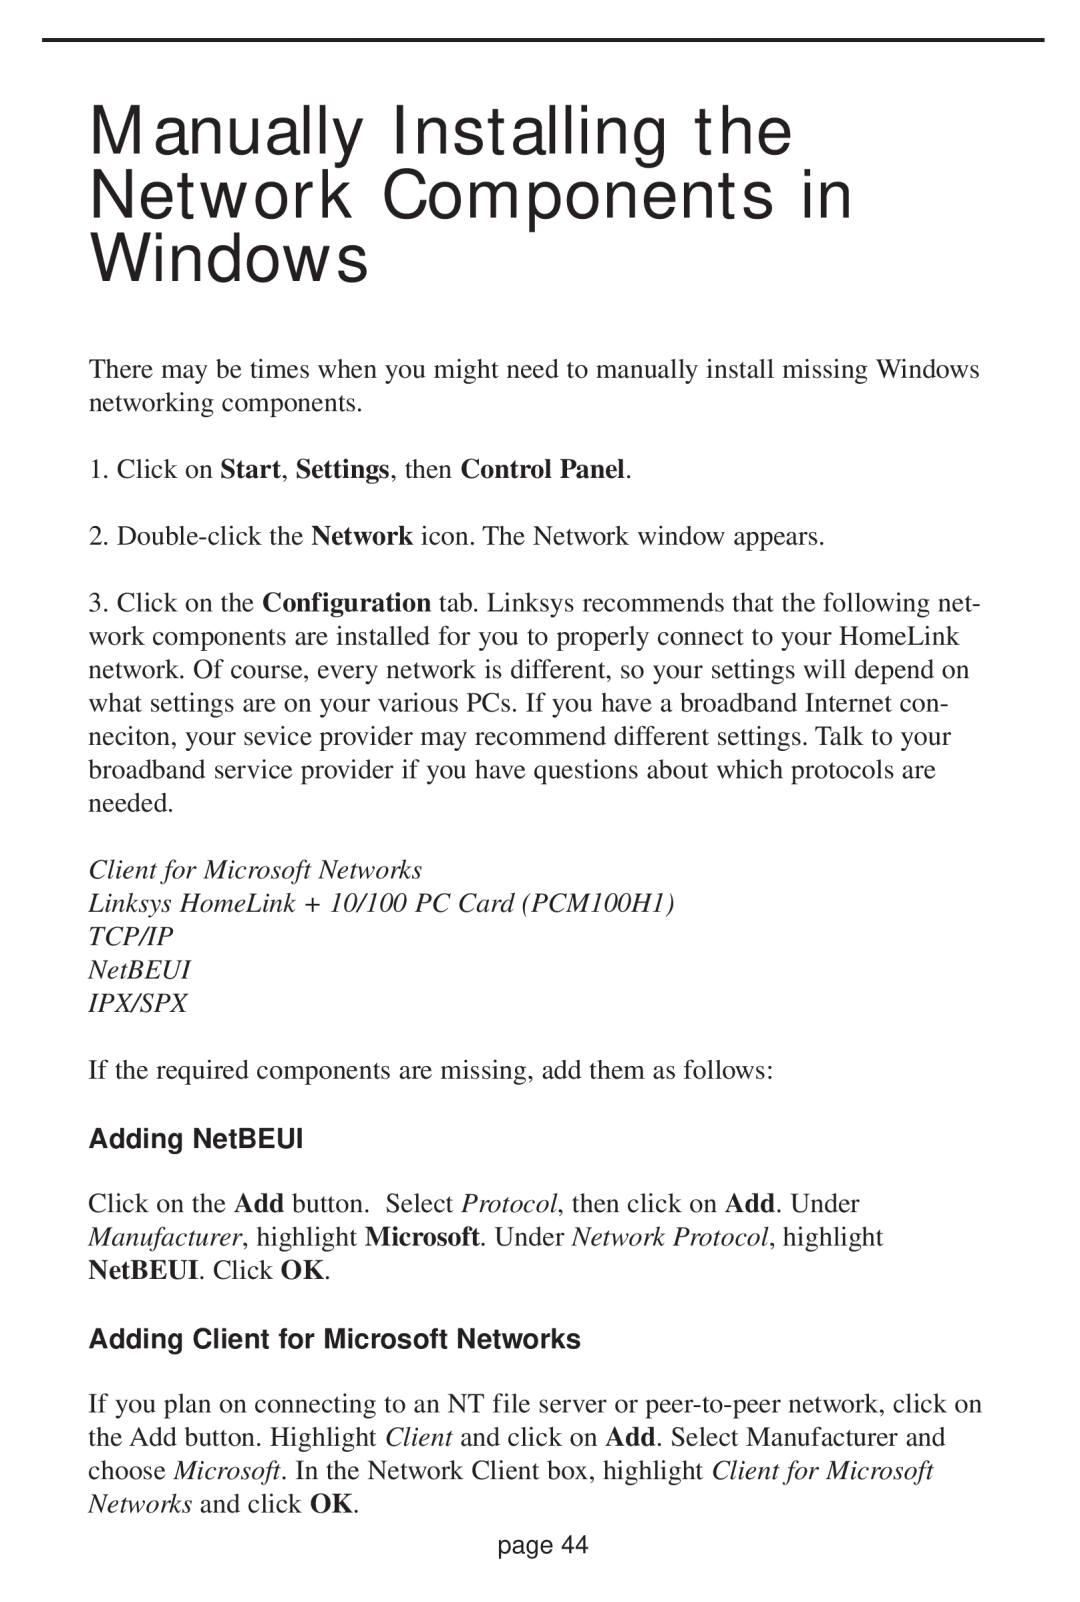 Linksys HPN100 manual Manually Installing the Network Components in Windows, Click on Start, Settings, then Control Panel 